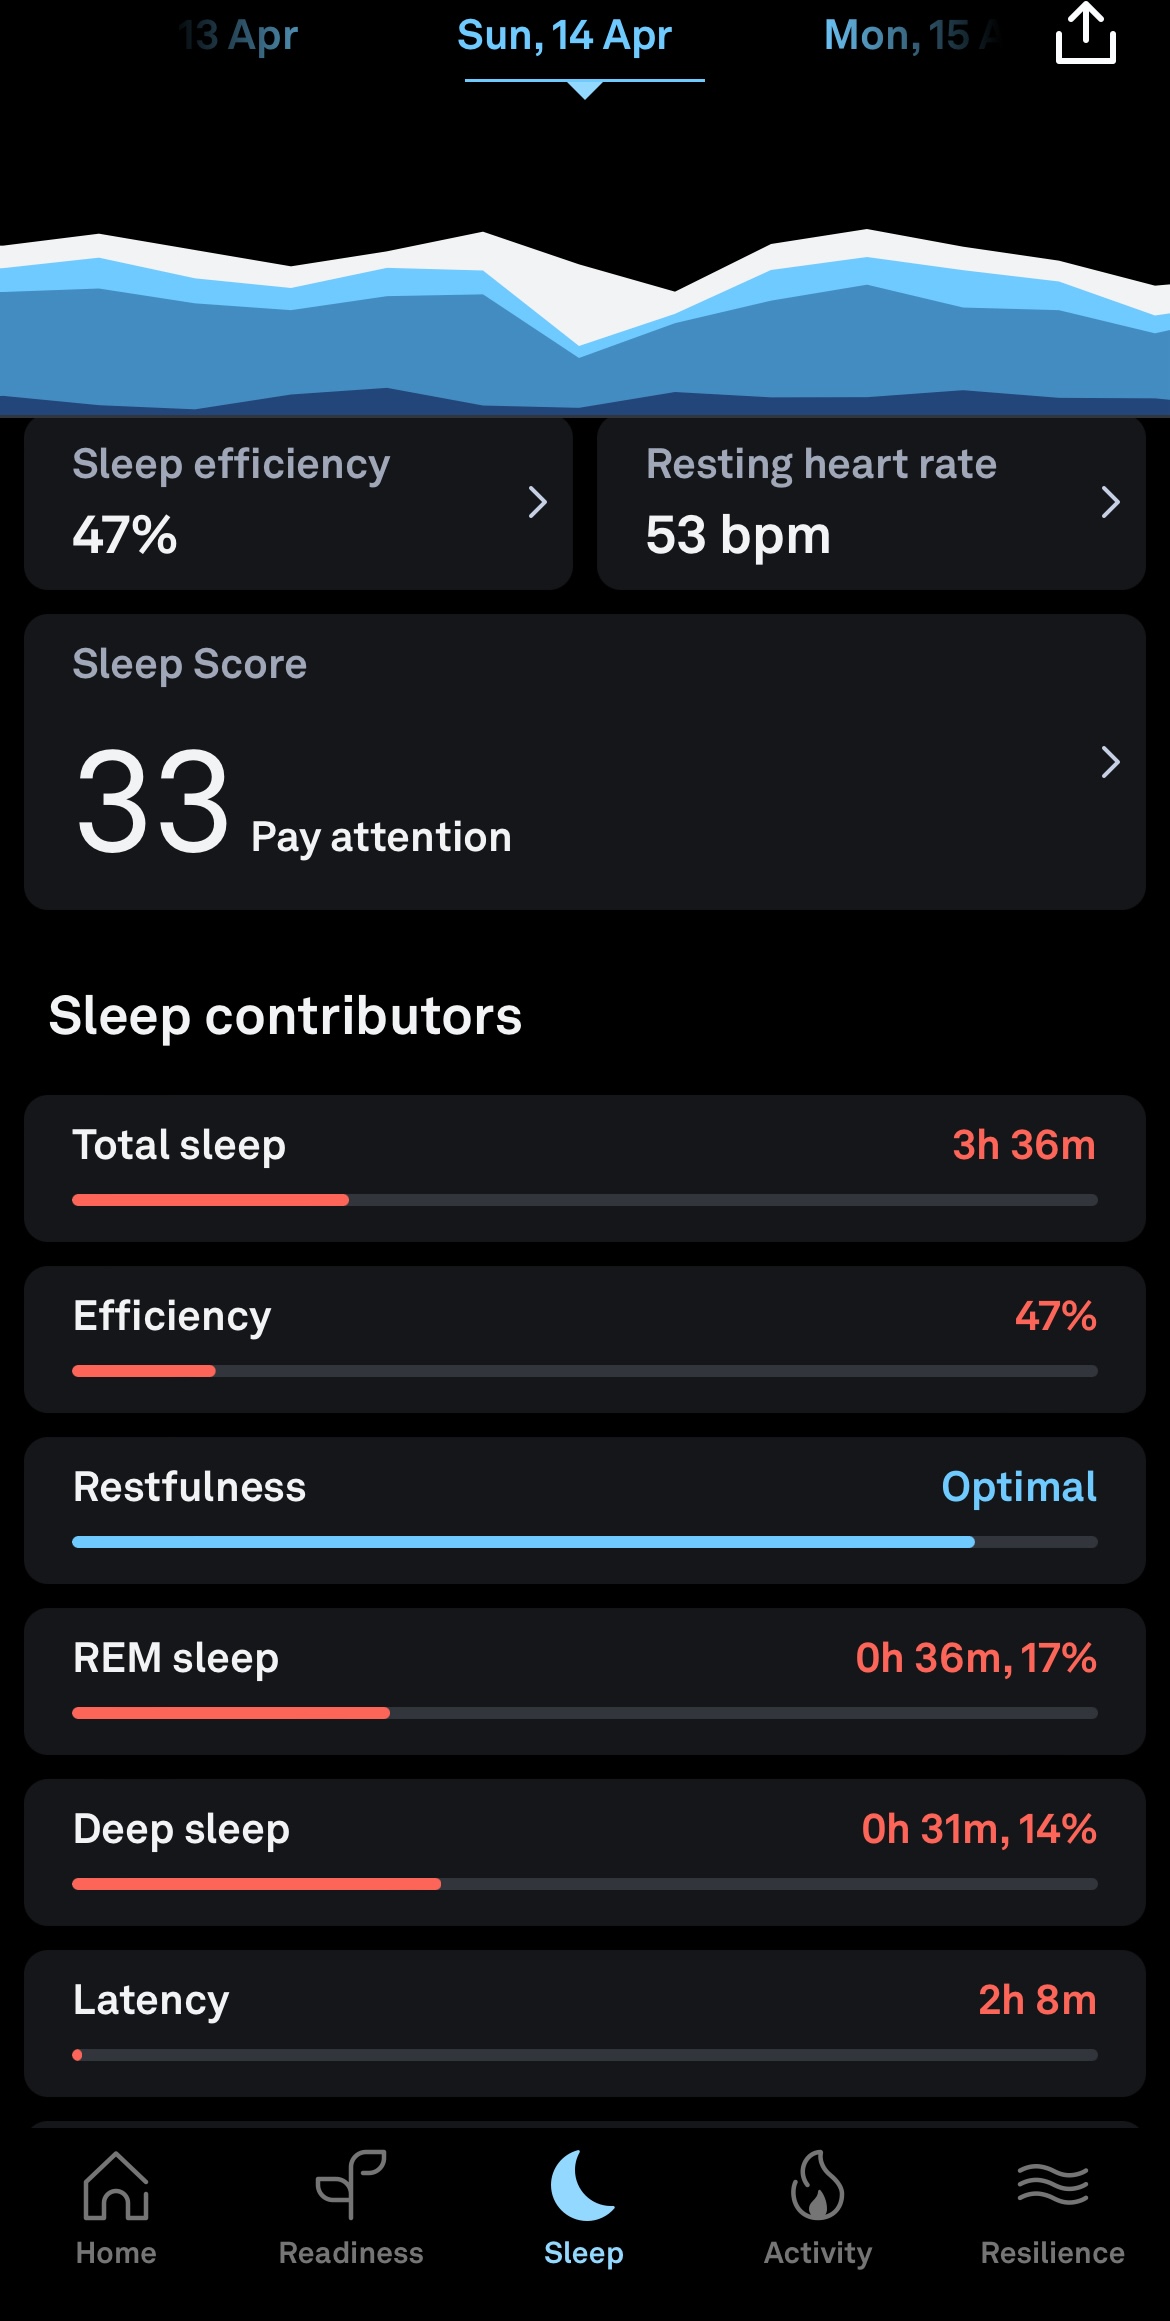 Numbers depicting a poor sleep score on an Oura ring app